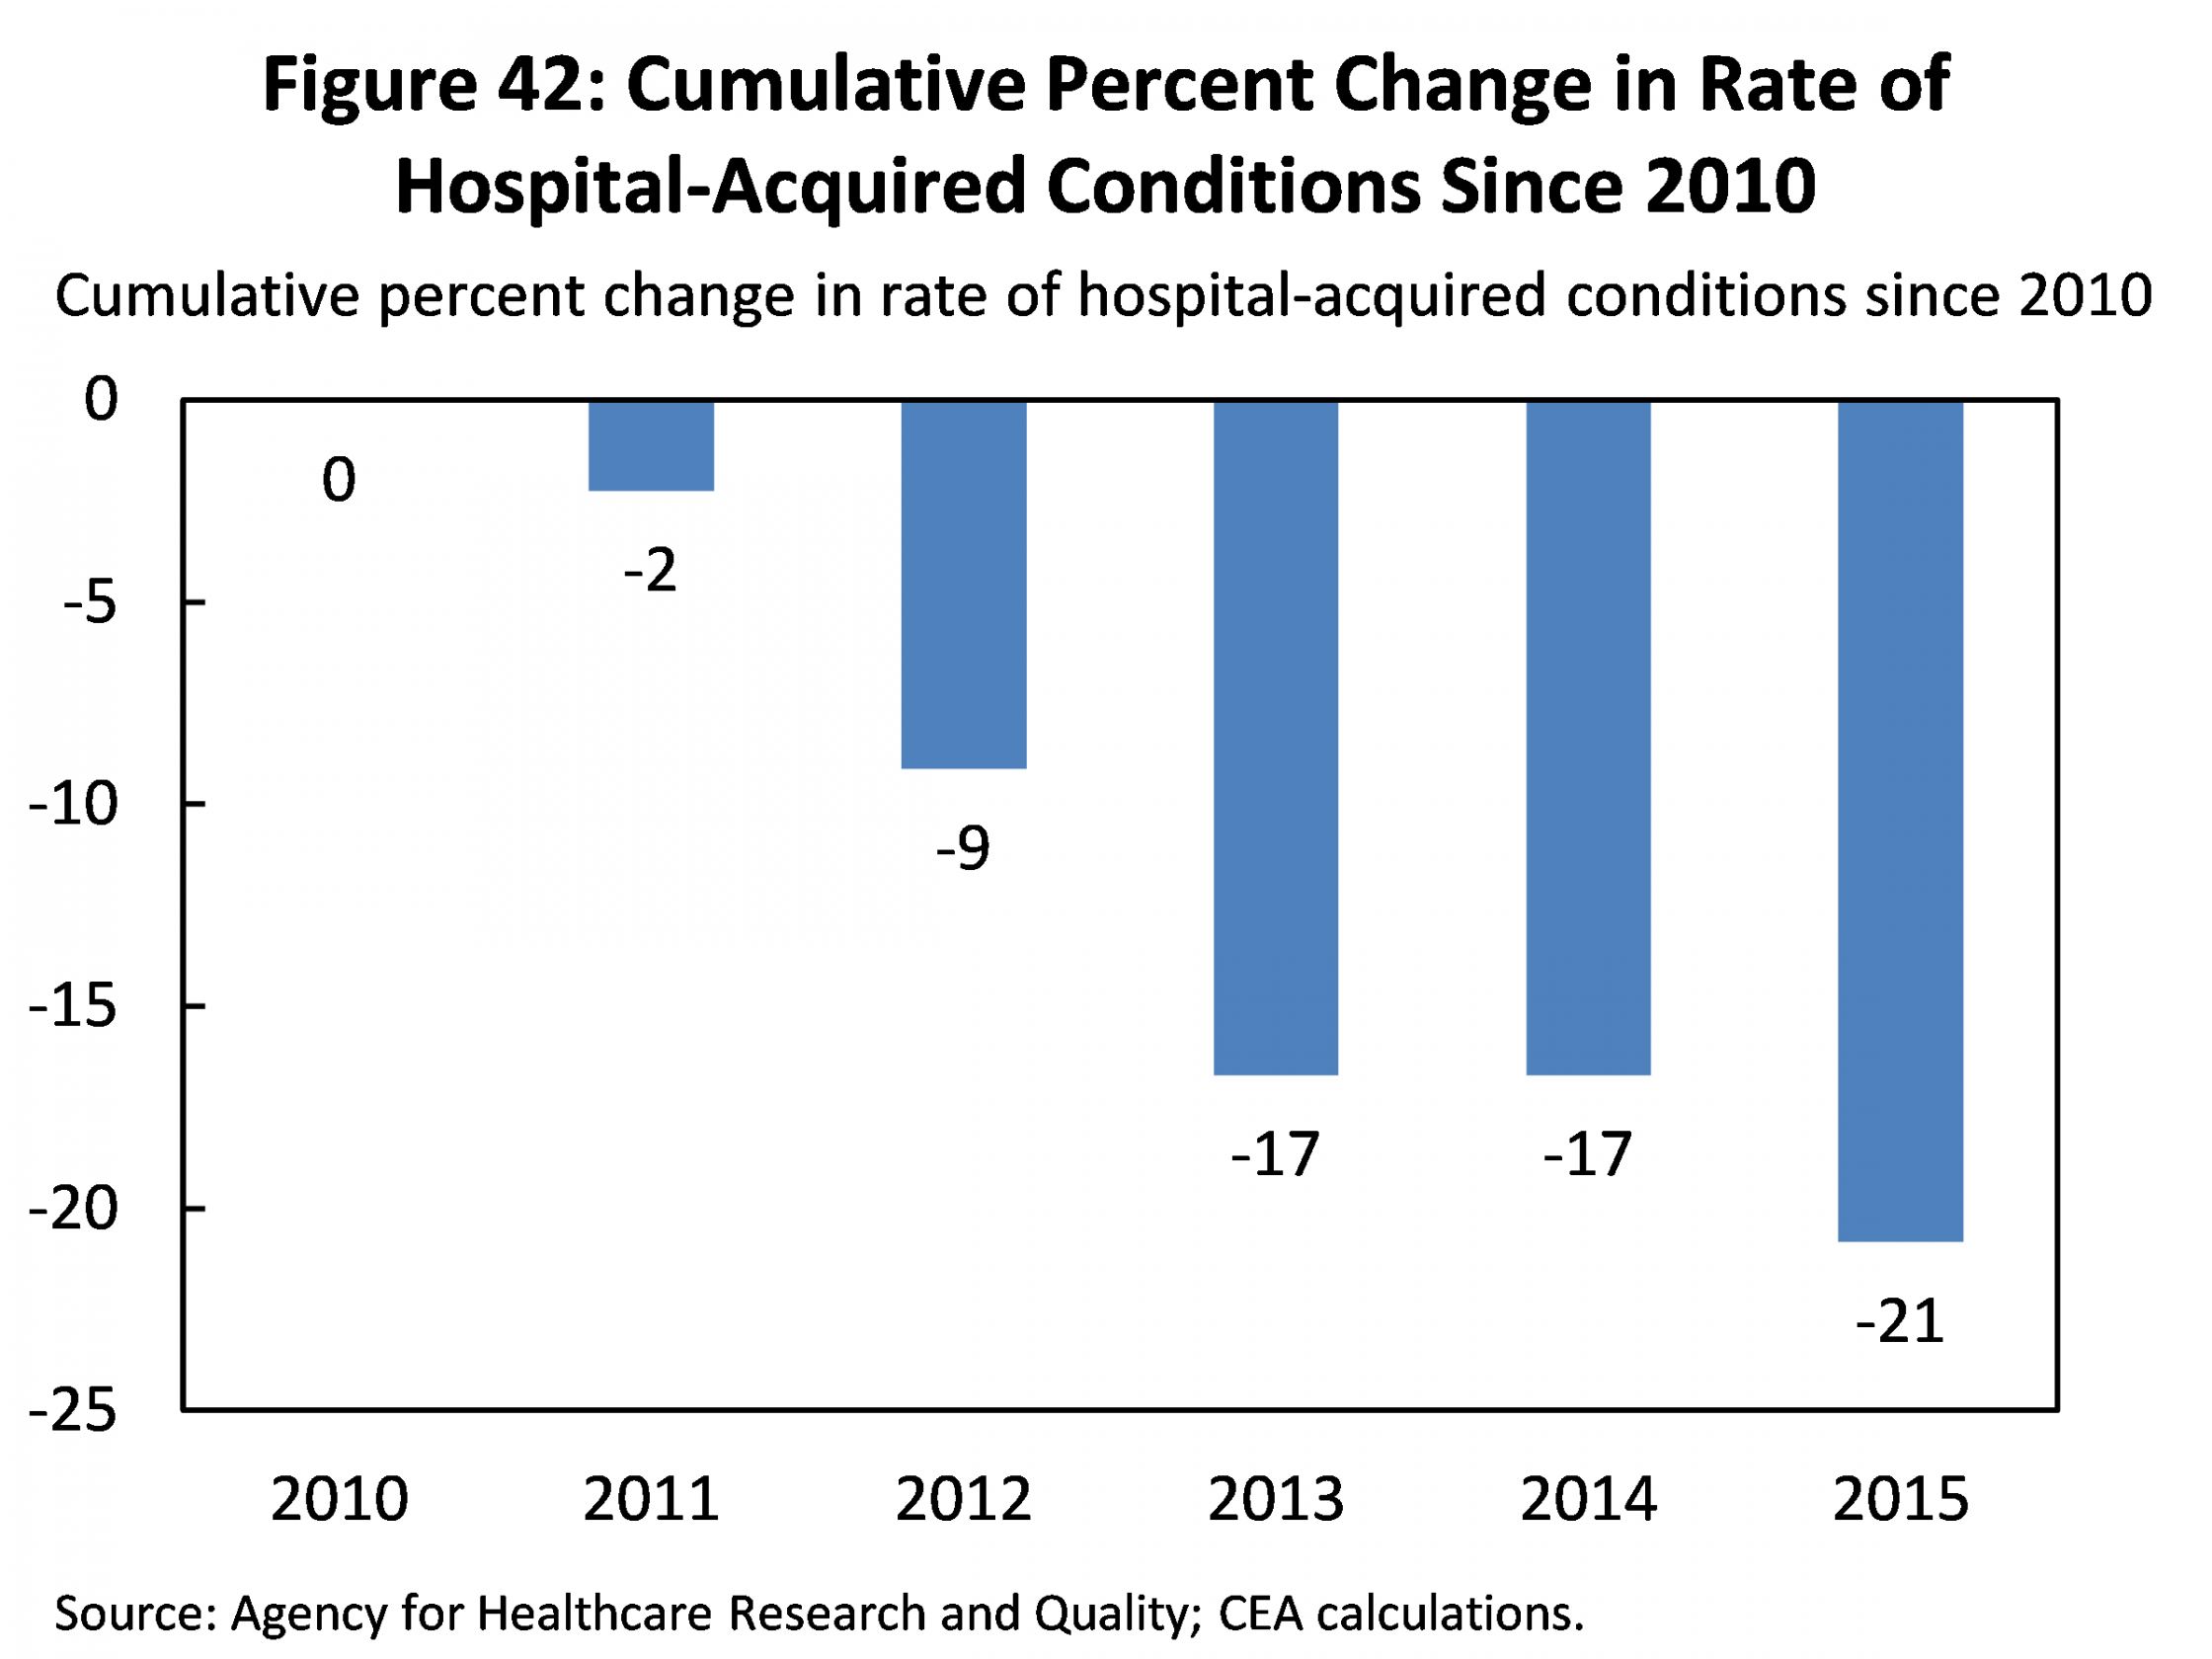 Cumulative Percent Change in Rate of Hospital-Acquired Conditions Since 2010